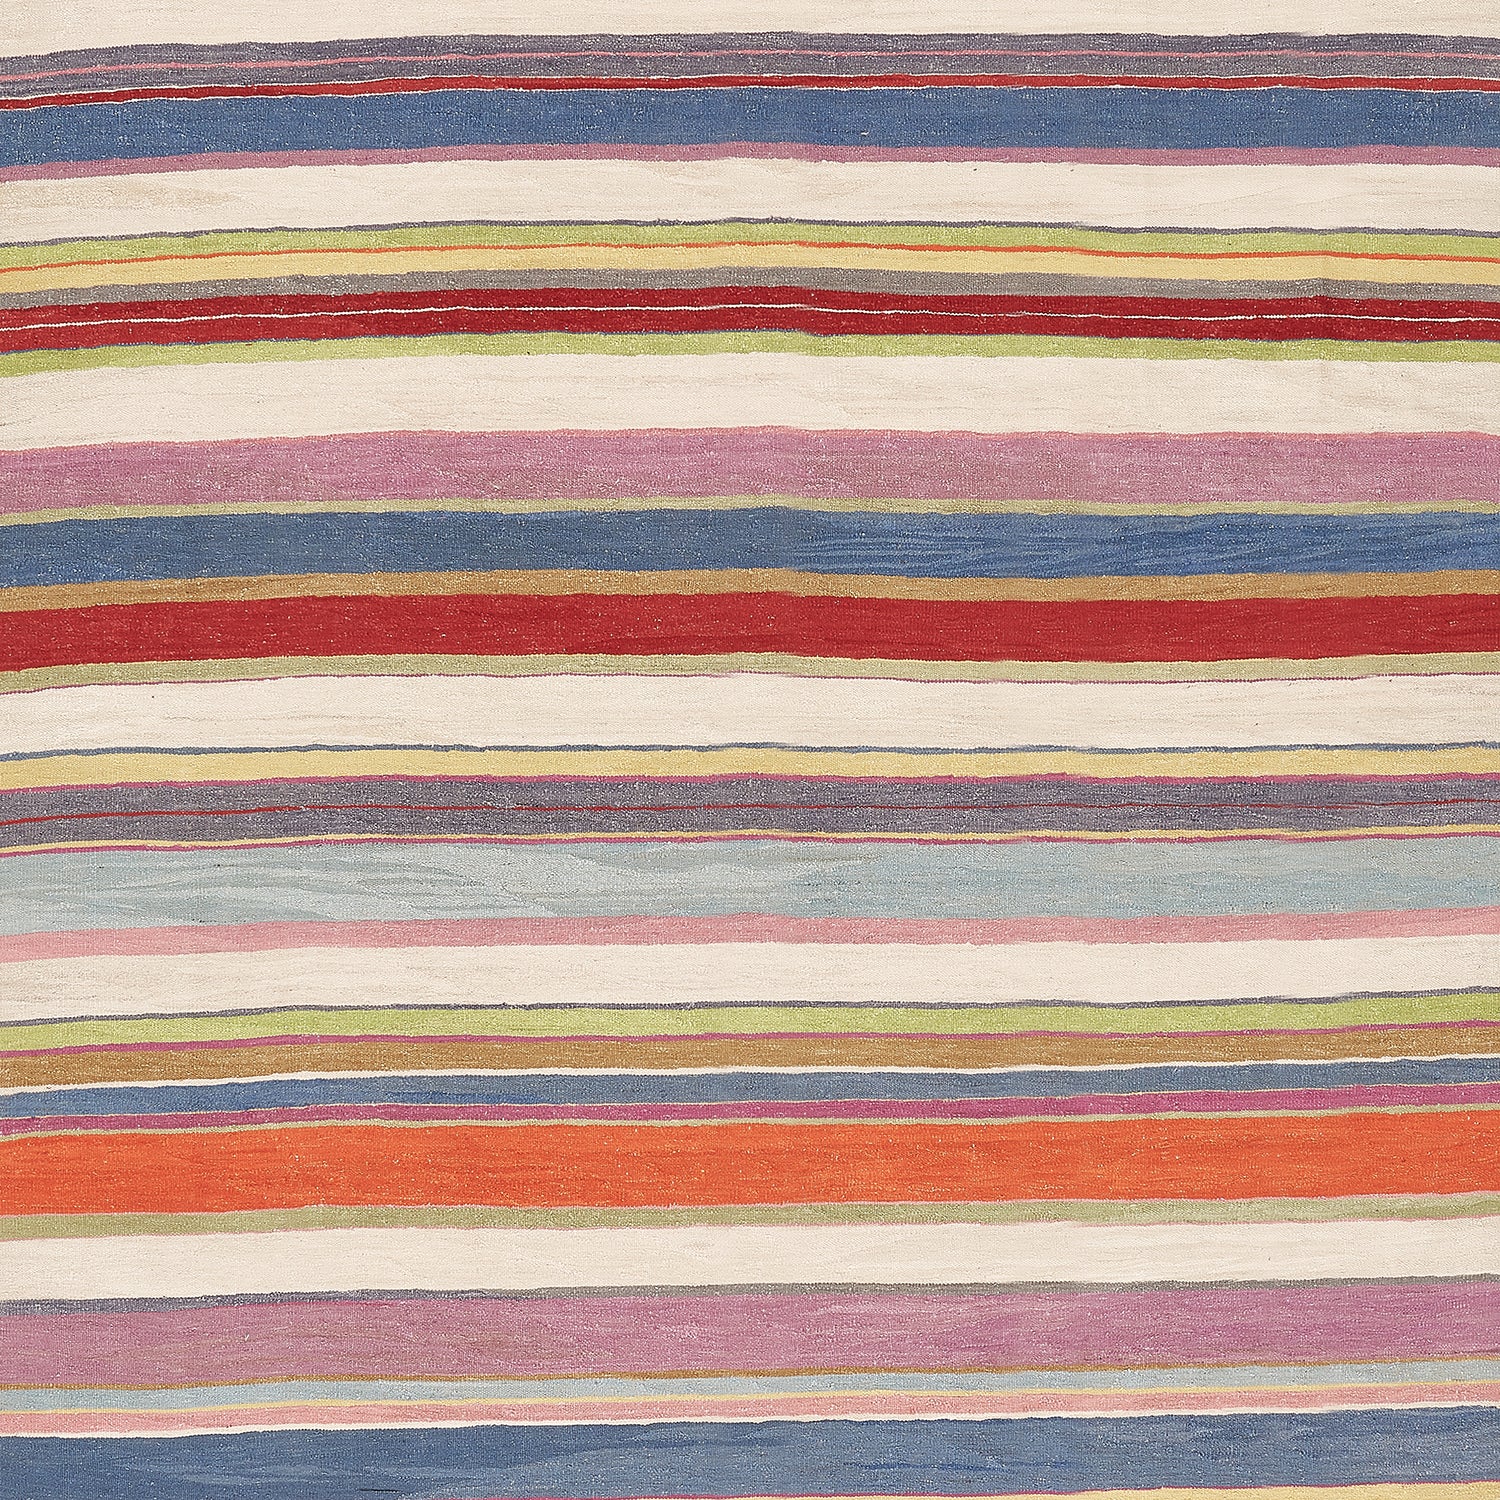 Vibrantly colored, irregularly striped textile with a woven, textured feel.